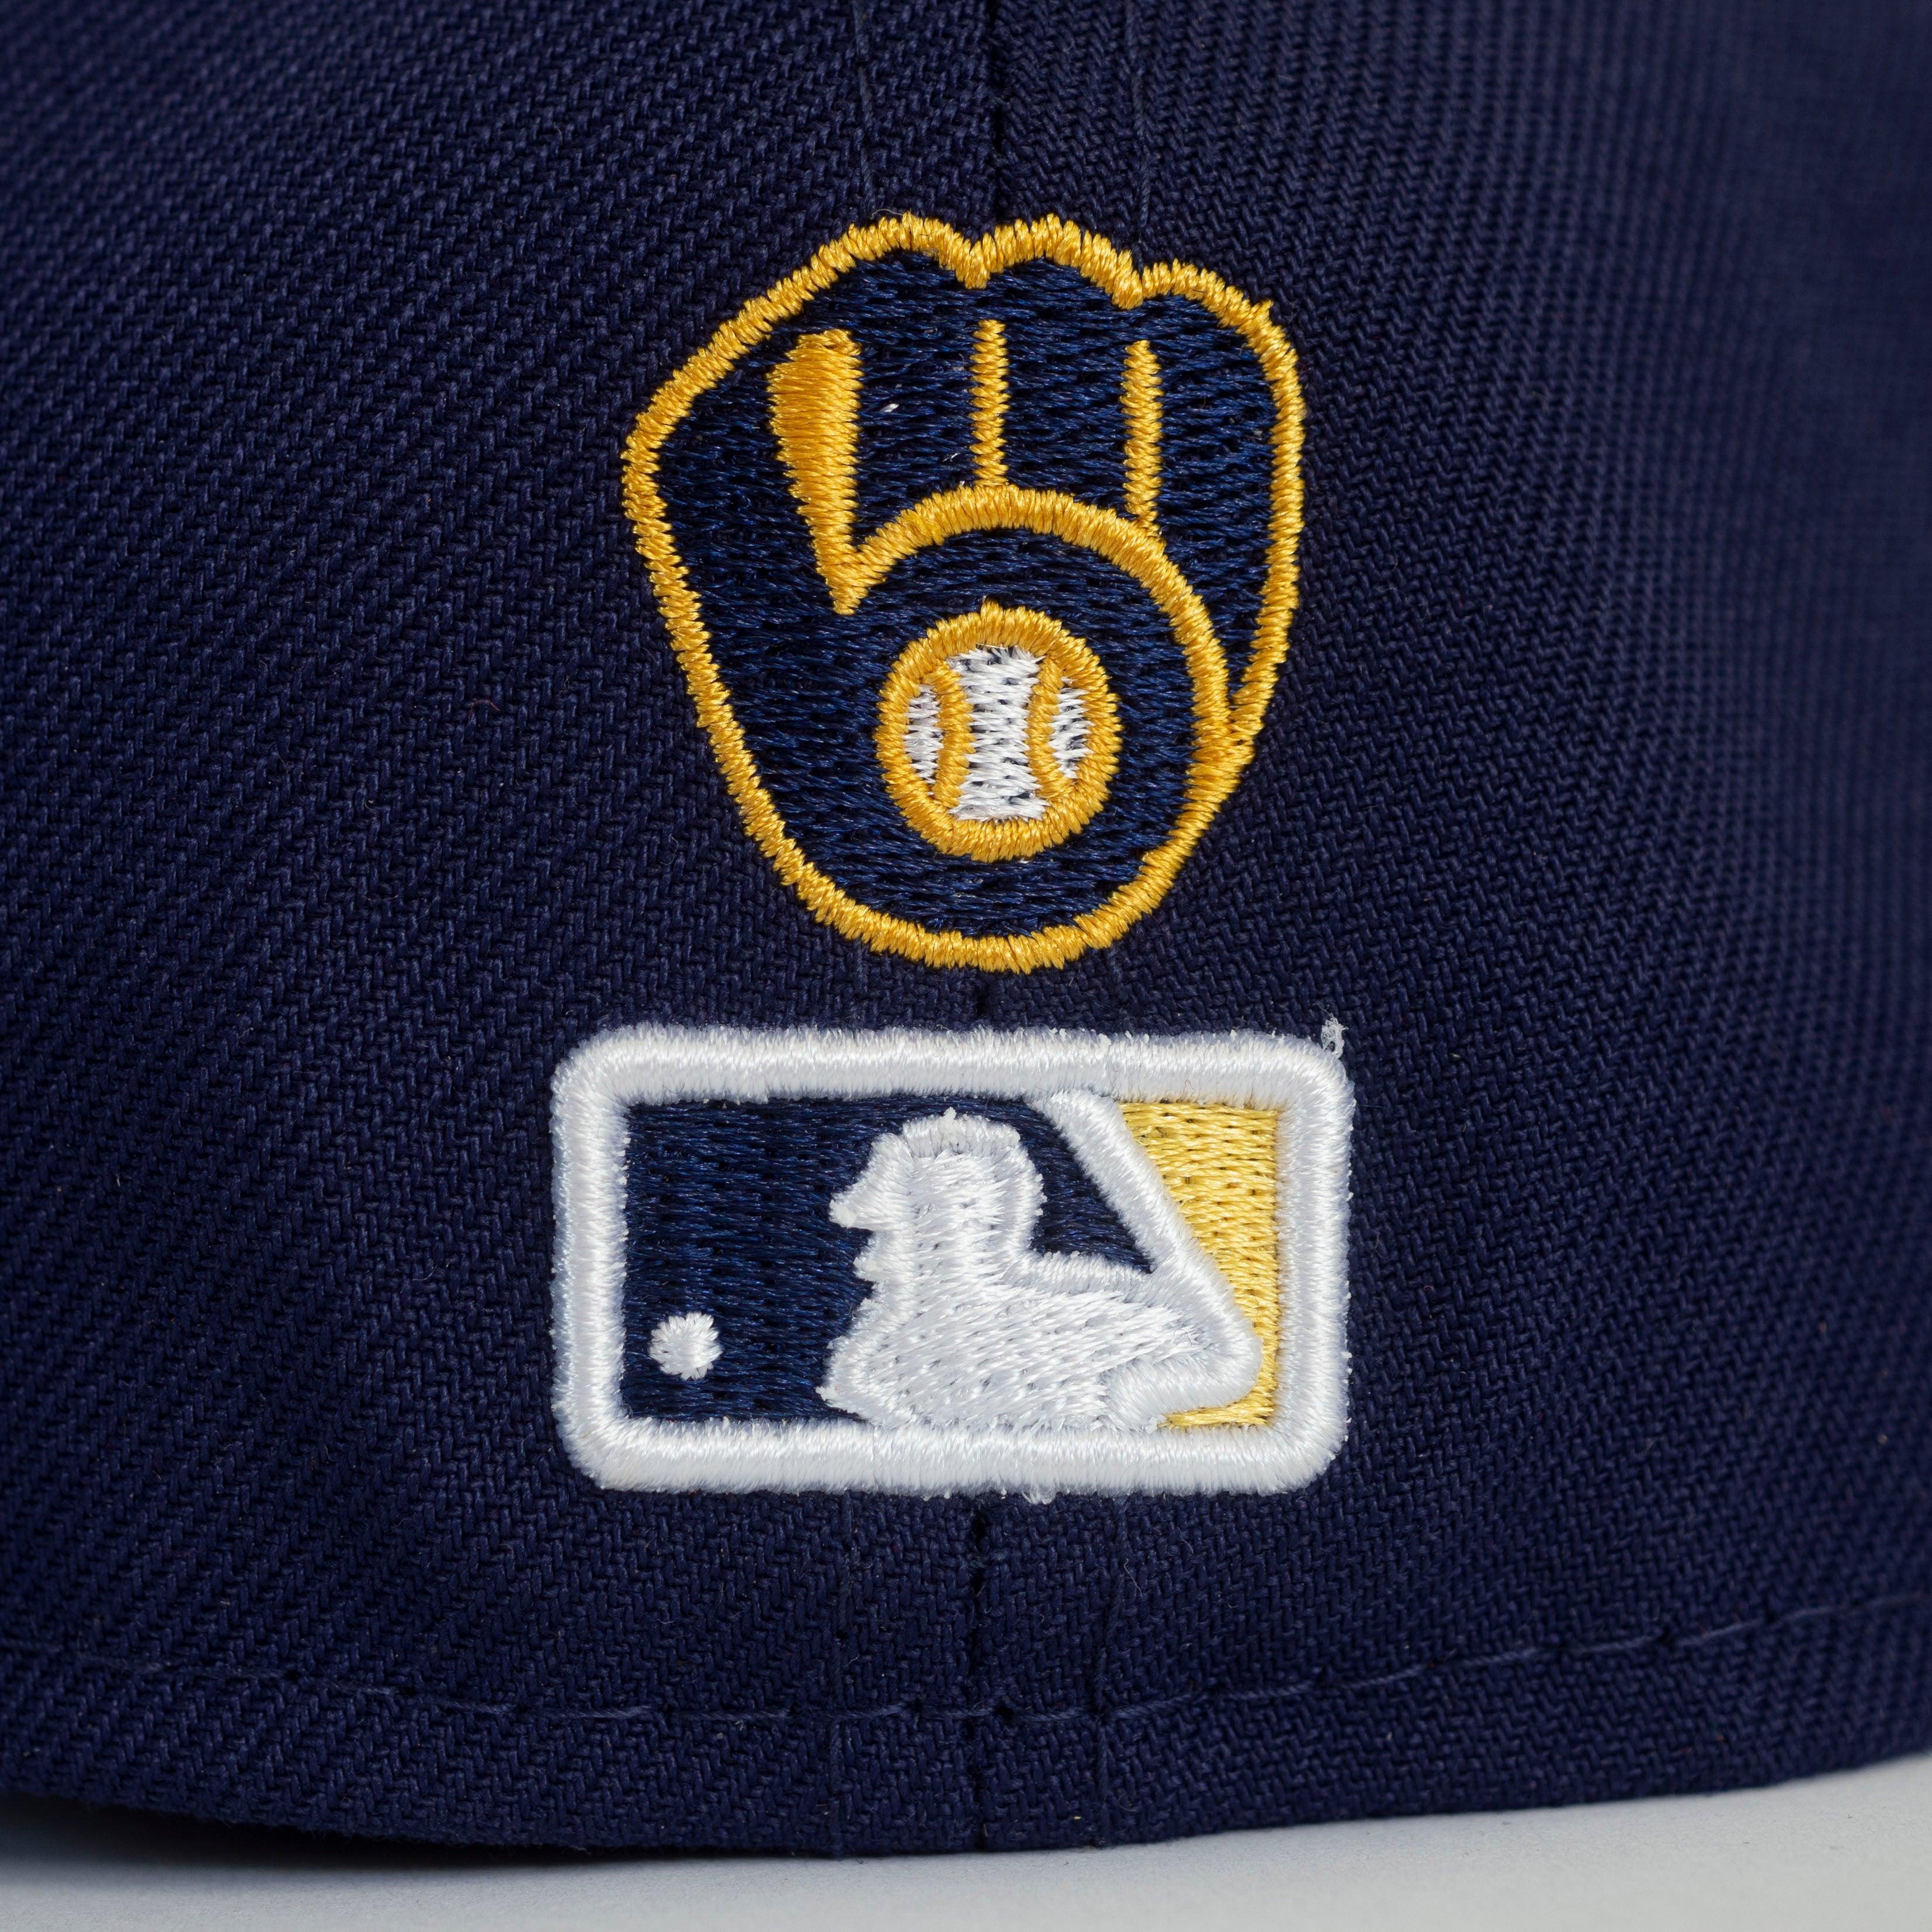 NEW ERA 59FIFTY MLB MILWAUKEE BREWERS SIDE PATCH BLOOM NAVY / SOFT YELLOW UV FITTED CAP - FAM